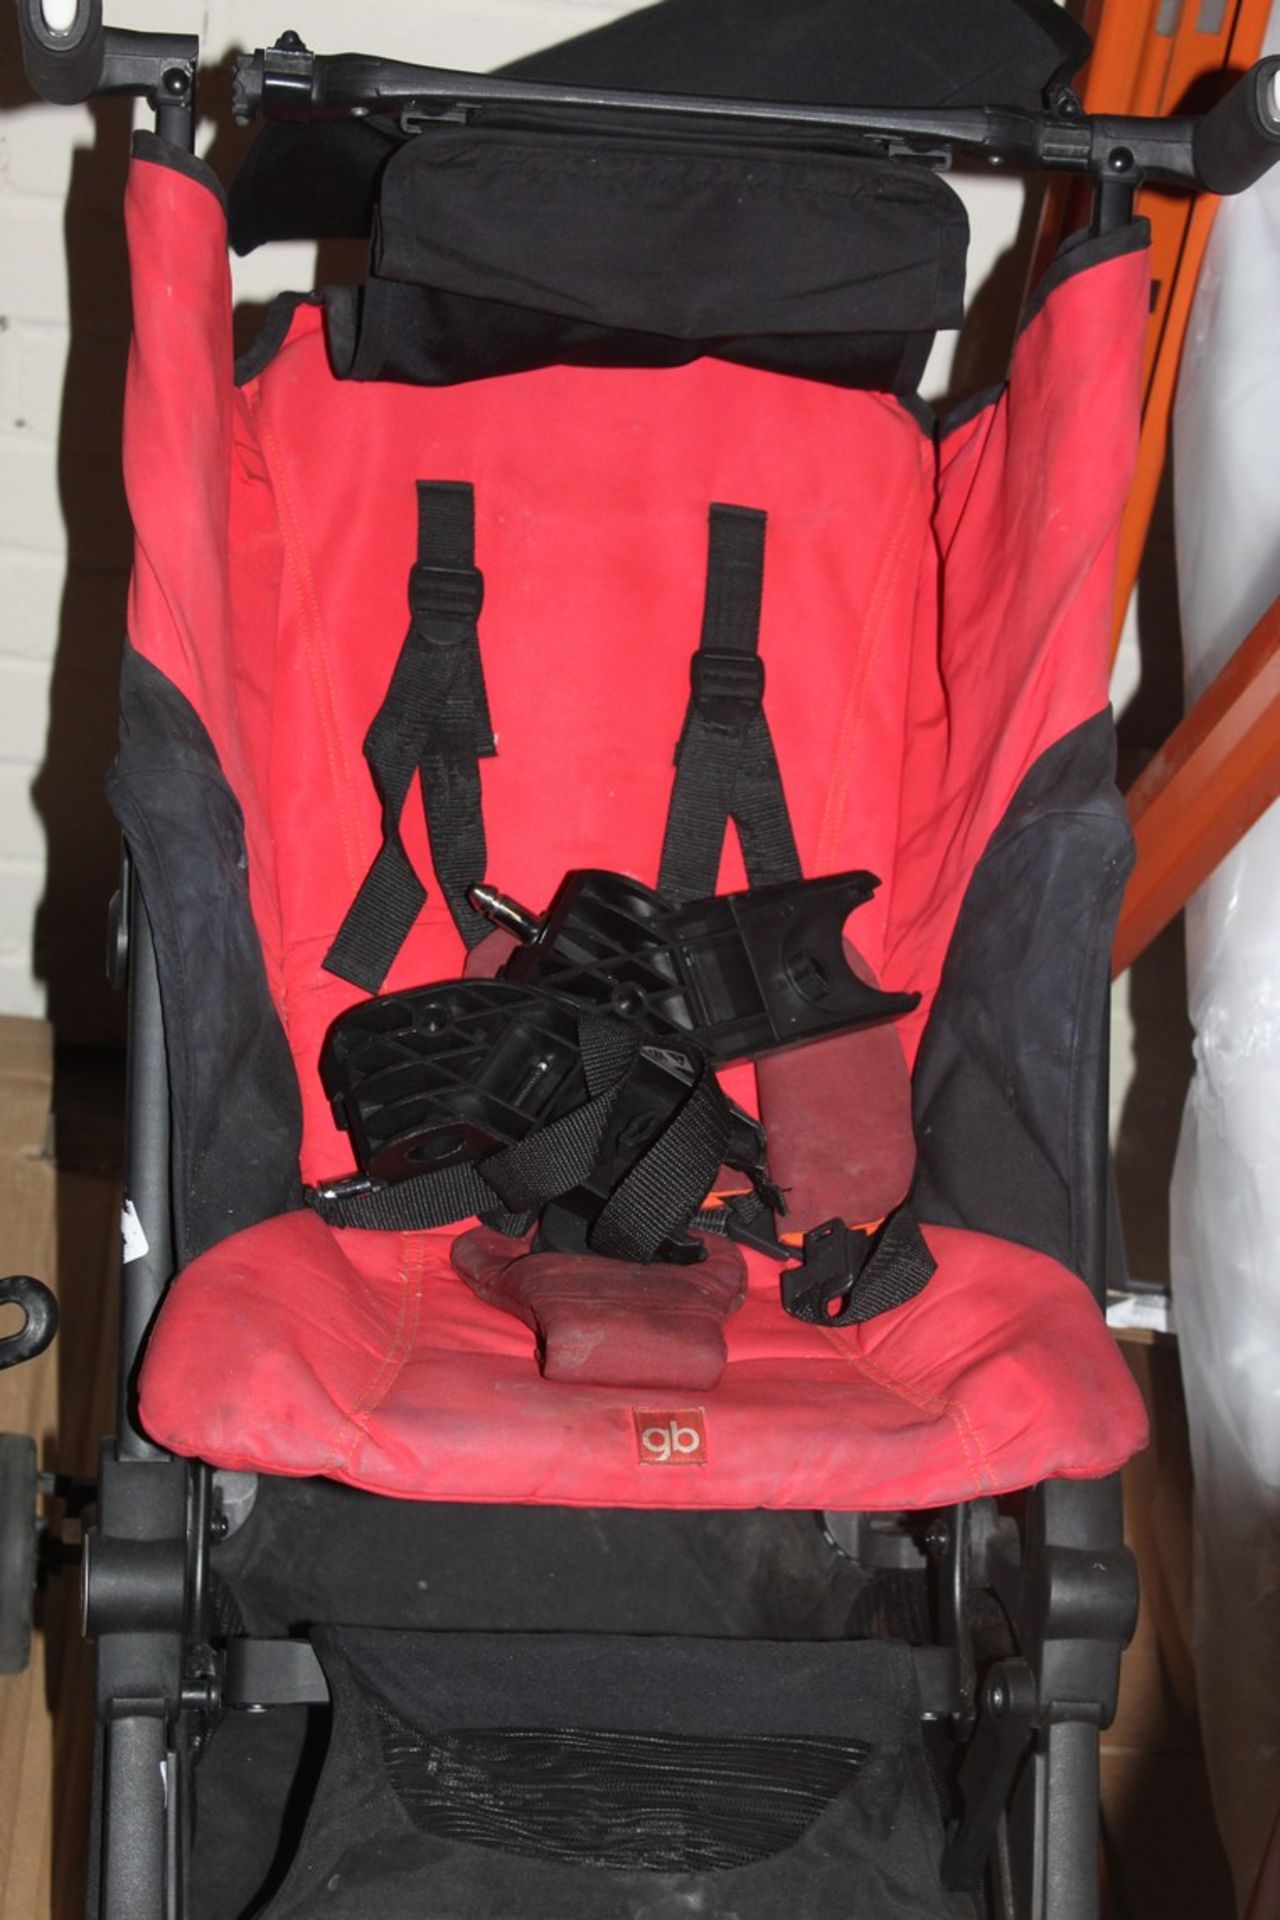 GB Push Pram (In Need of Attention) RRP £45 (RET00217444) (Public Viewing and Appraisals Available)